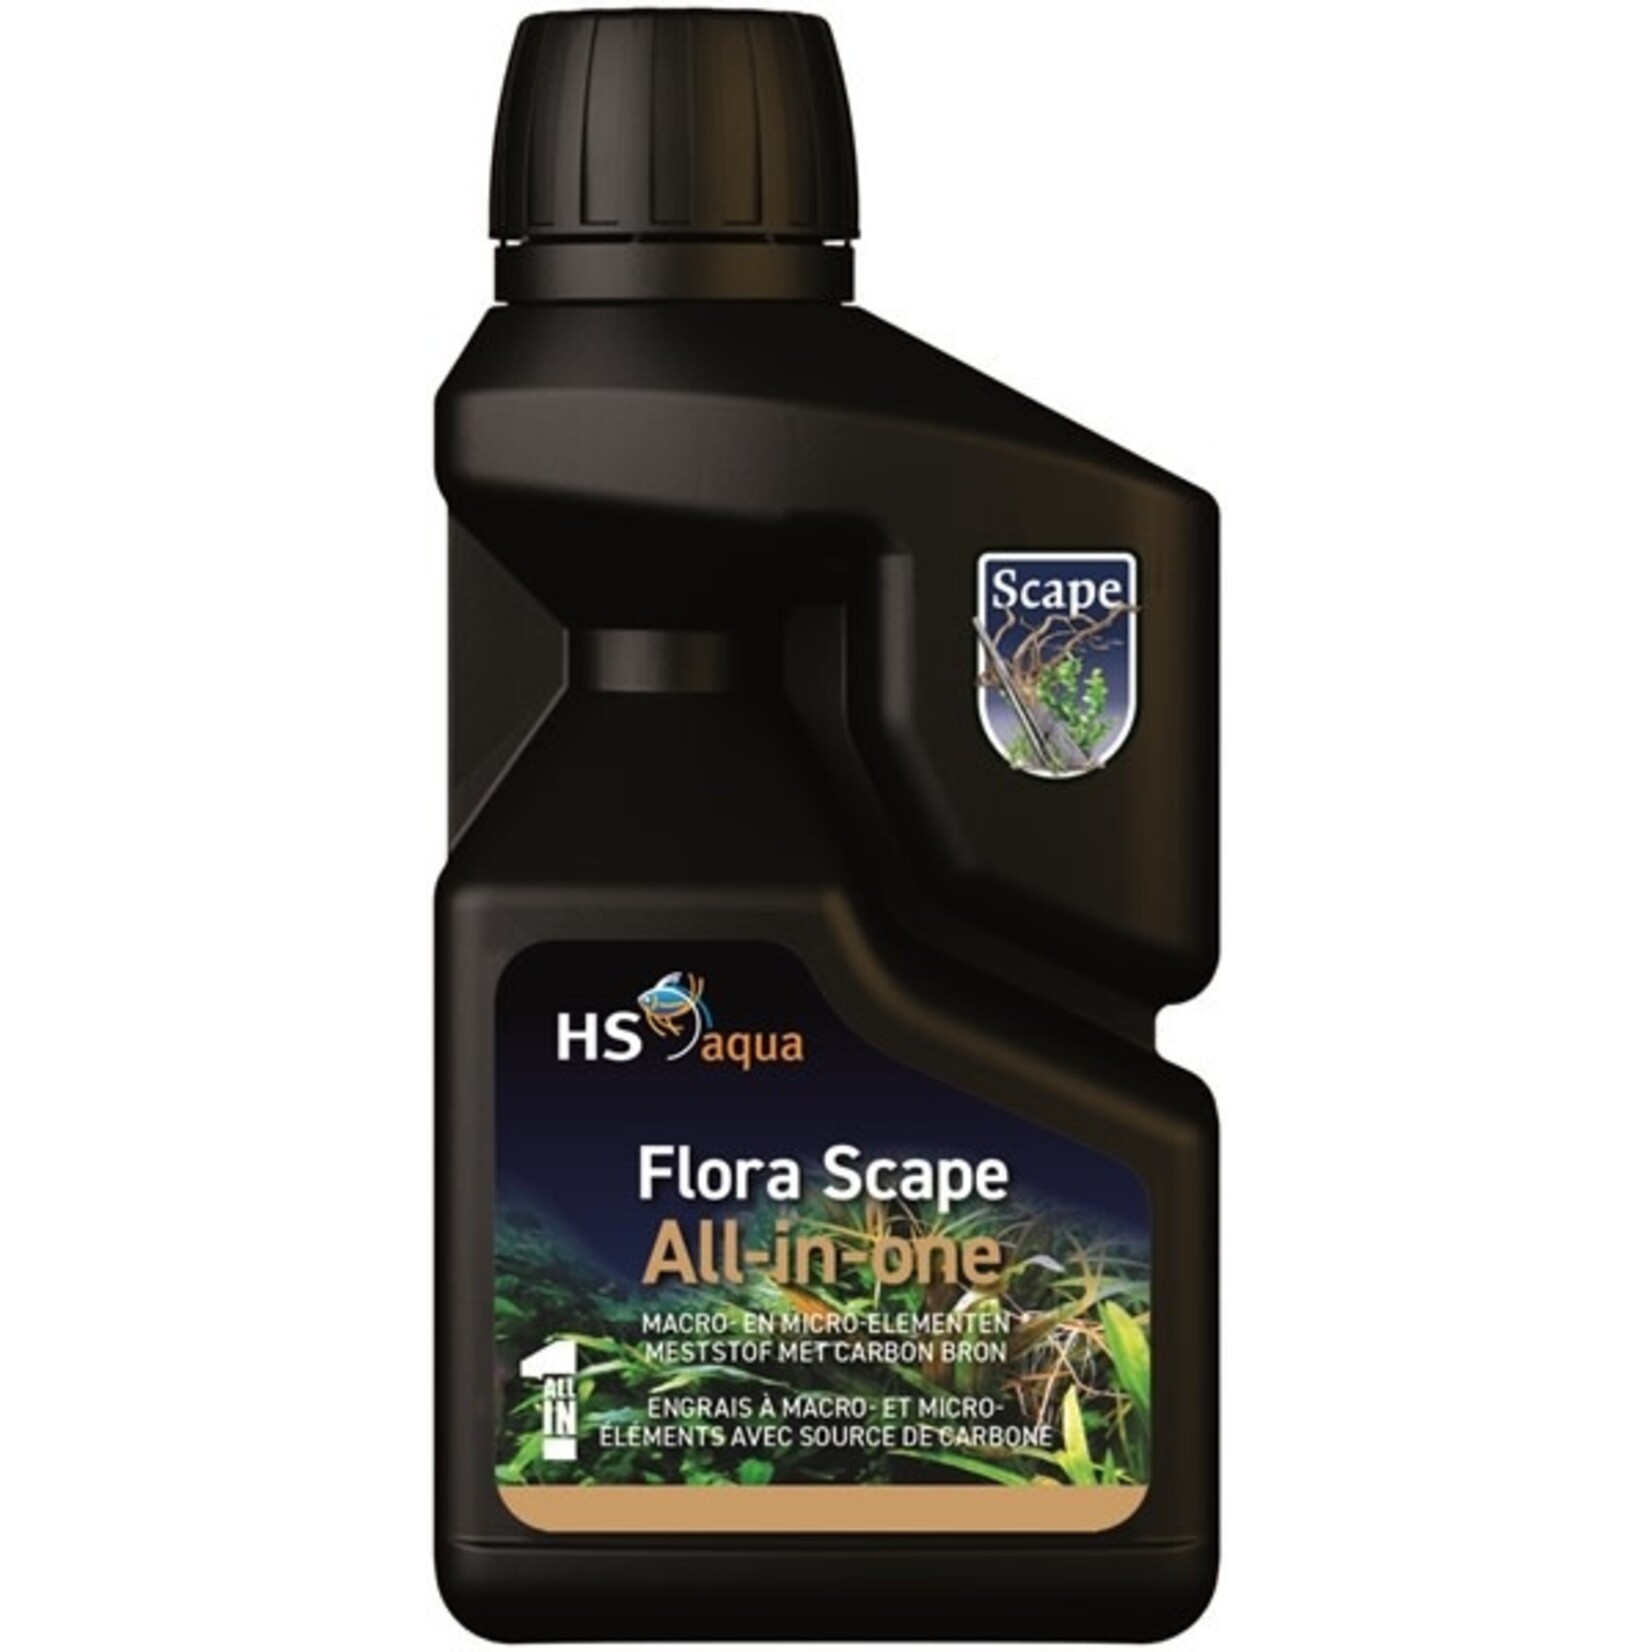 HS Aqua Flora scape all-in-one 250 ml